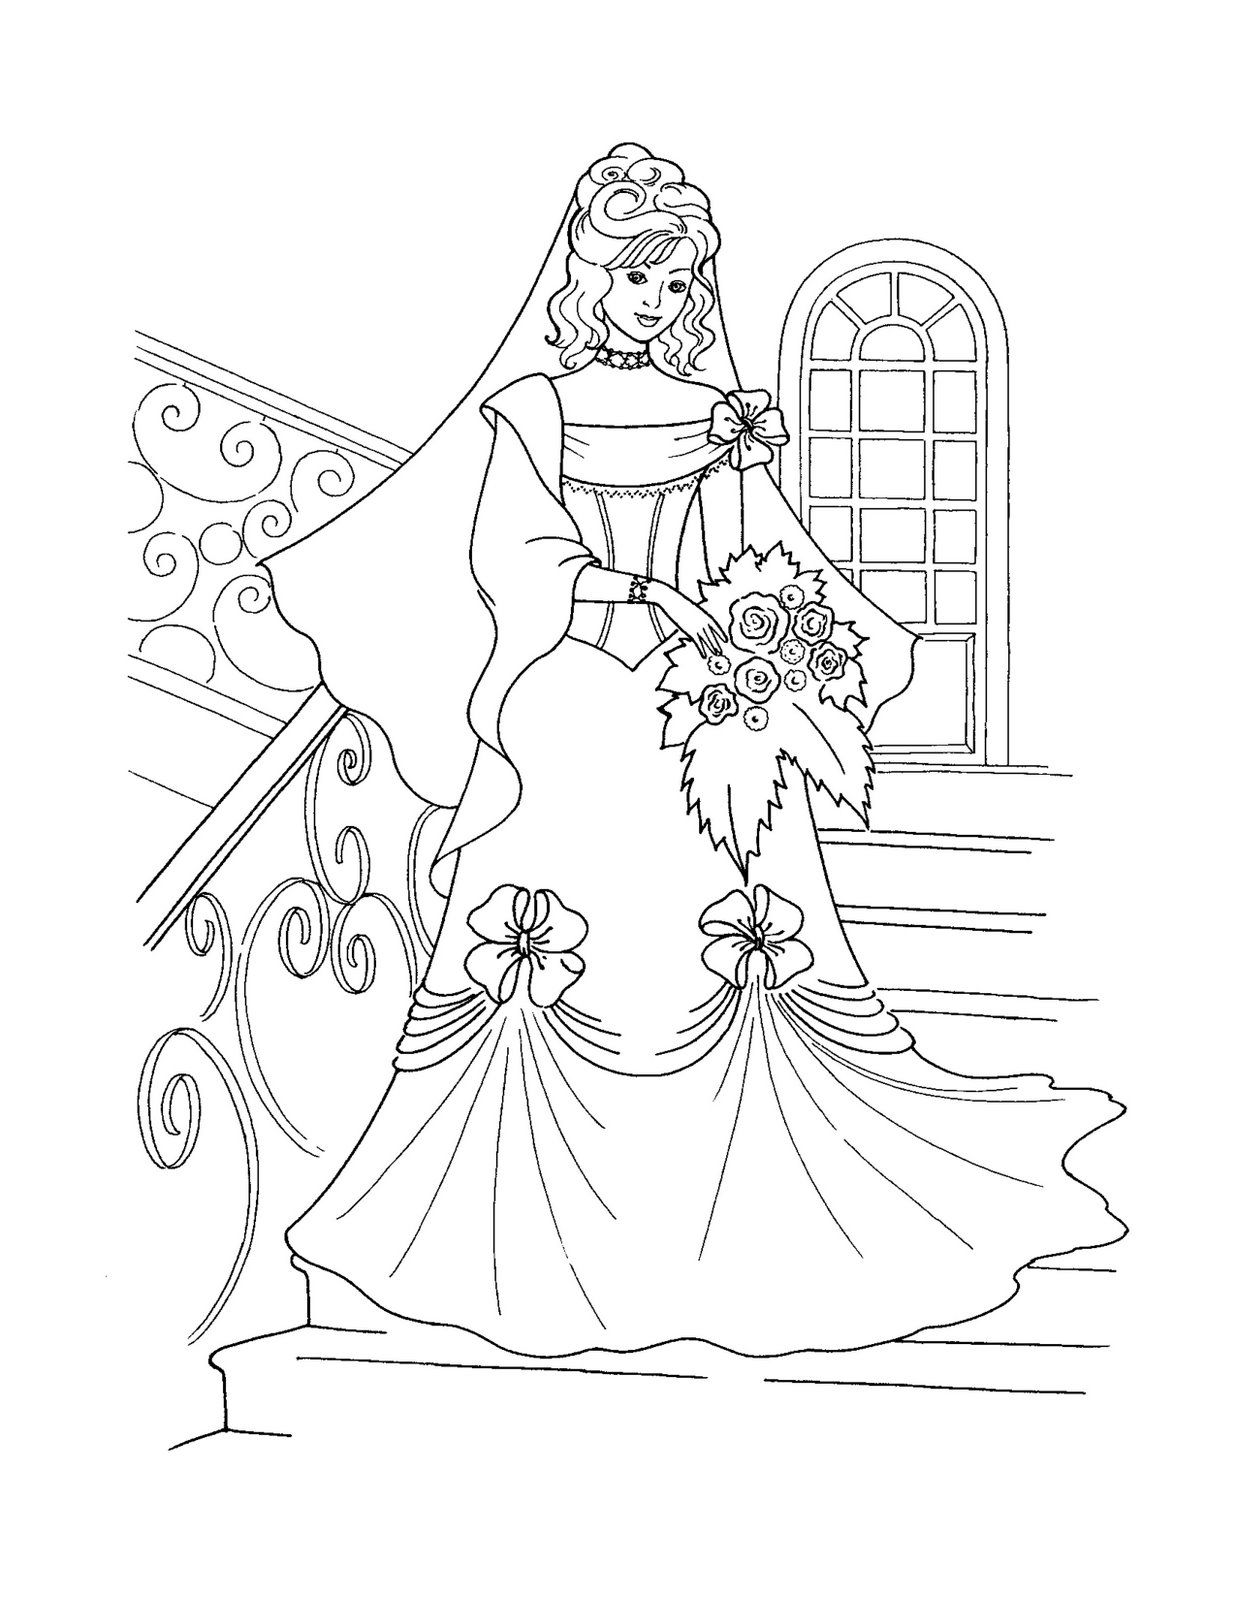 Coloring pages | Princess coloring ...